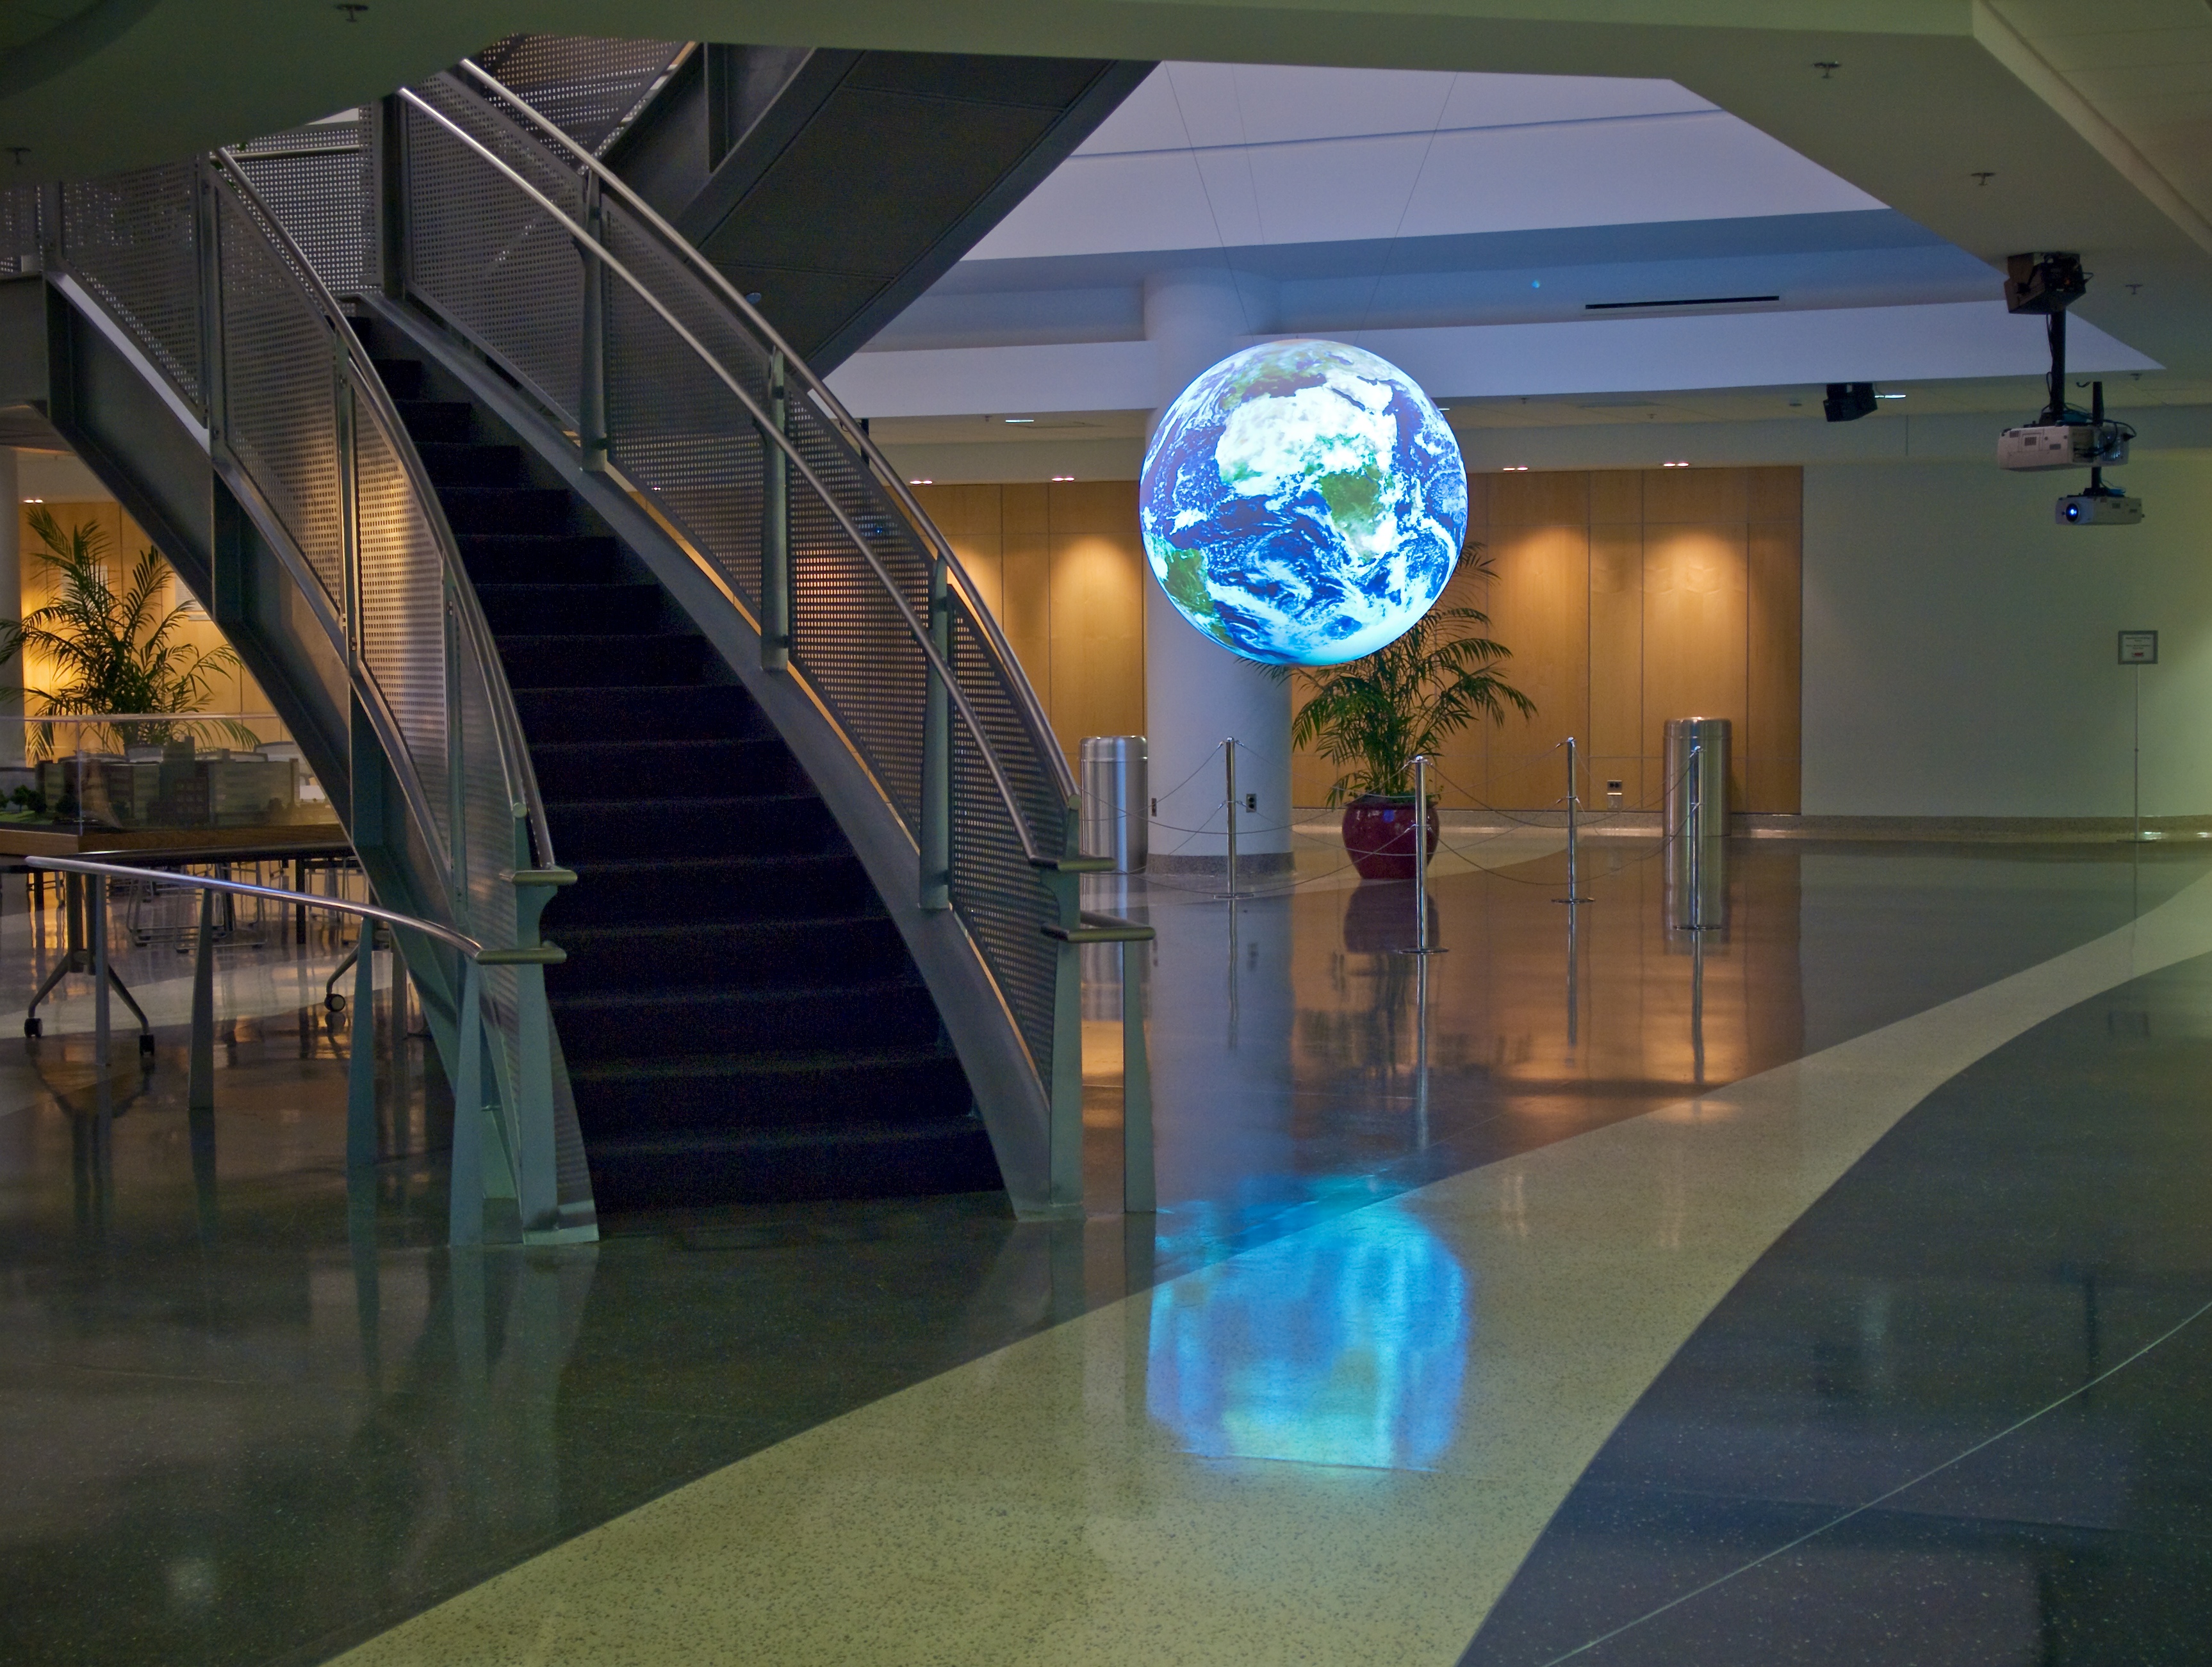 Science On a Sphere displays satellite imagery of Earth in a well-lit lobby. In the foreground is a staircase leading up to a balcony above the Sphere